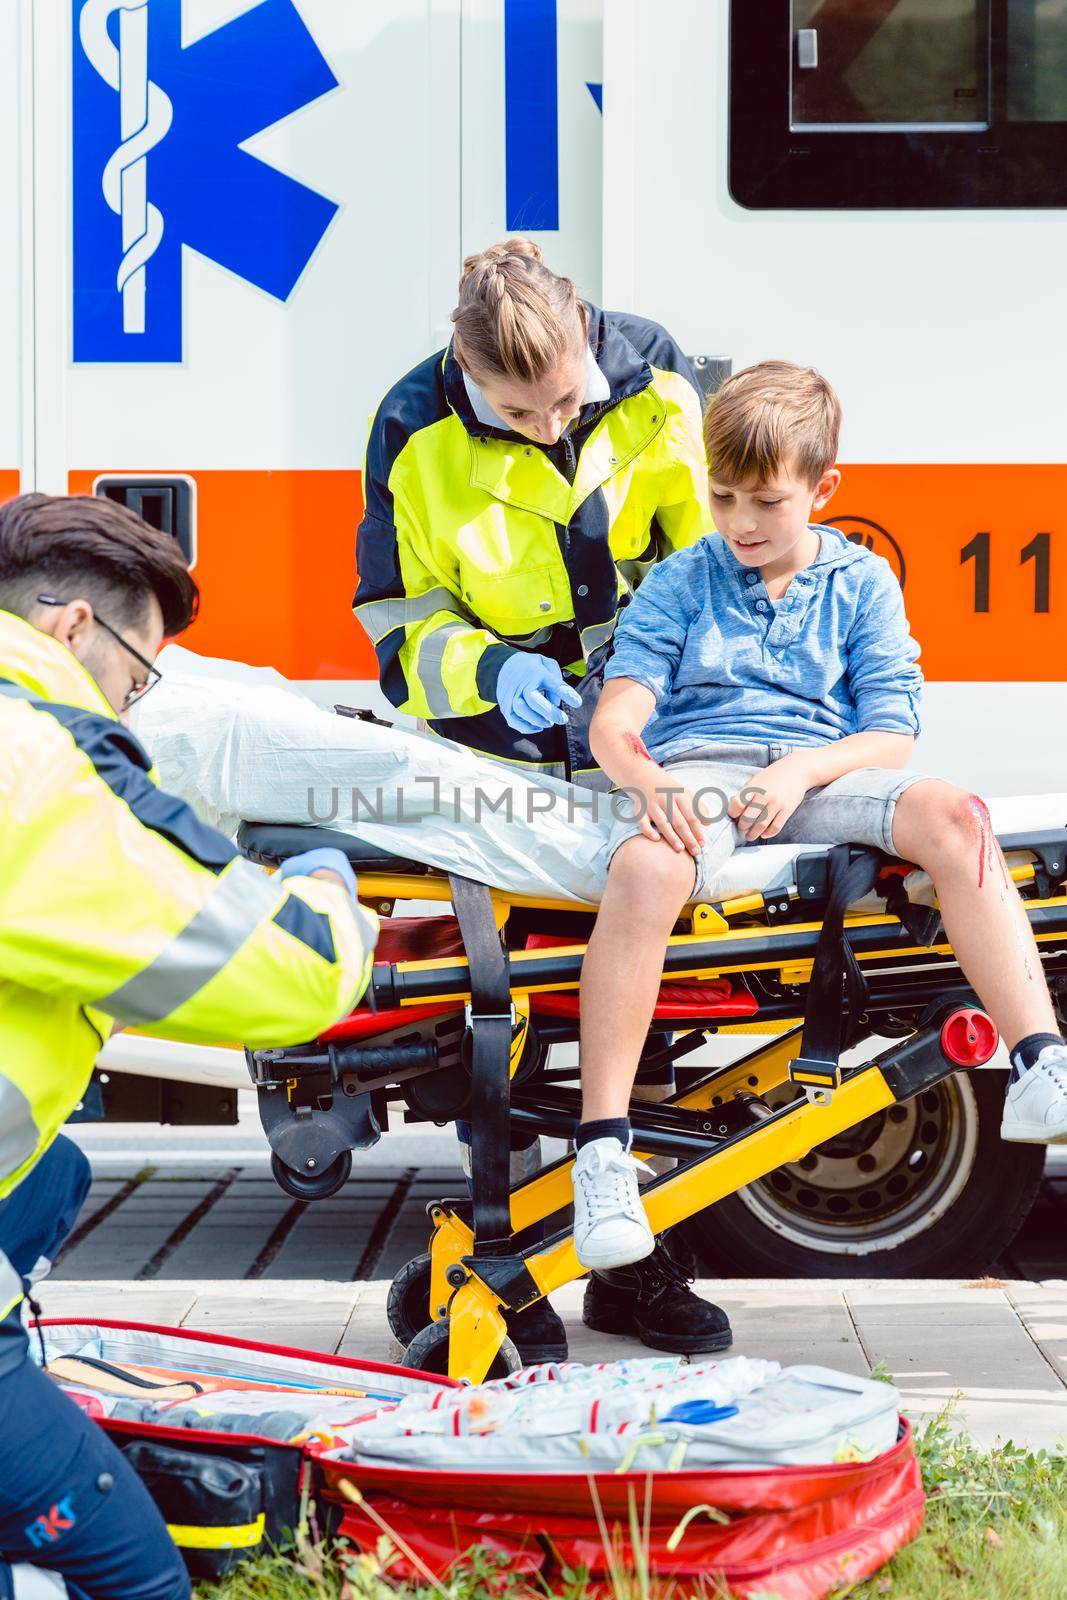 Emergency doctors caring for accident victim boy by Kzenon